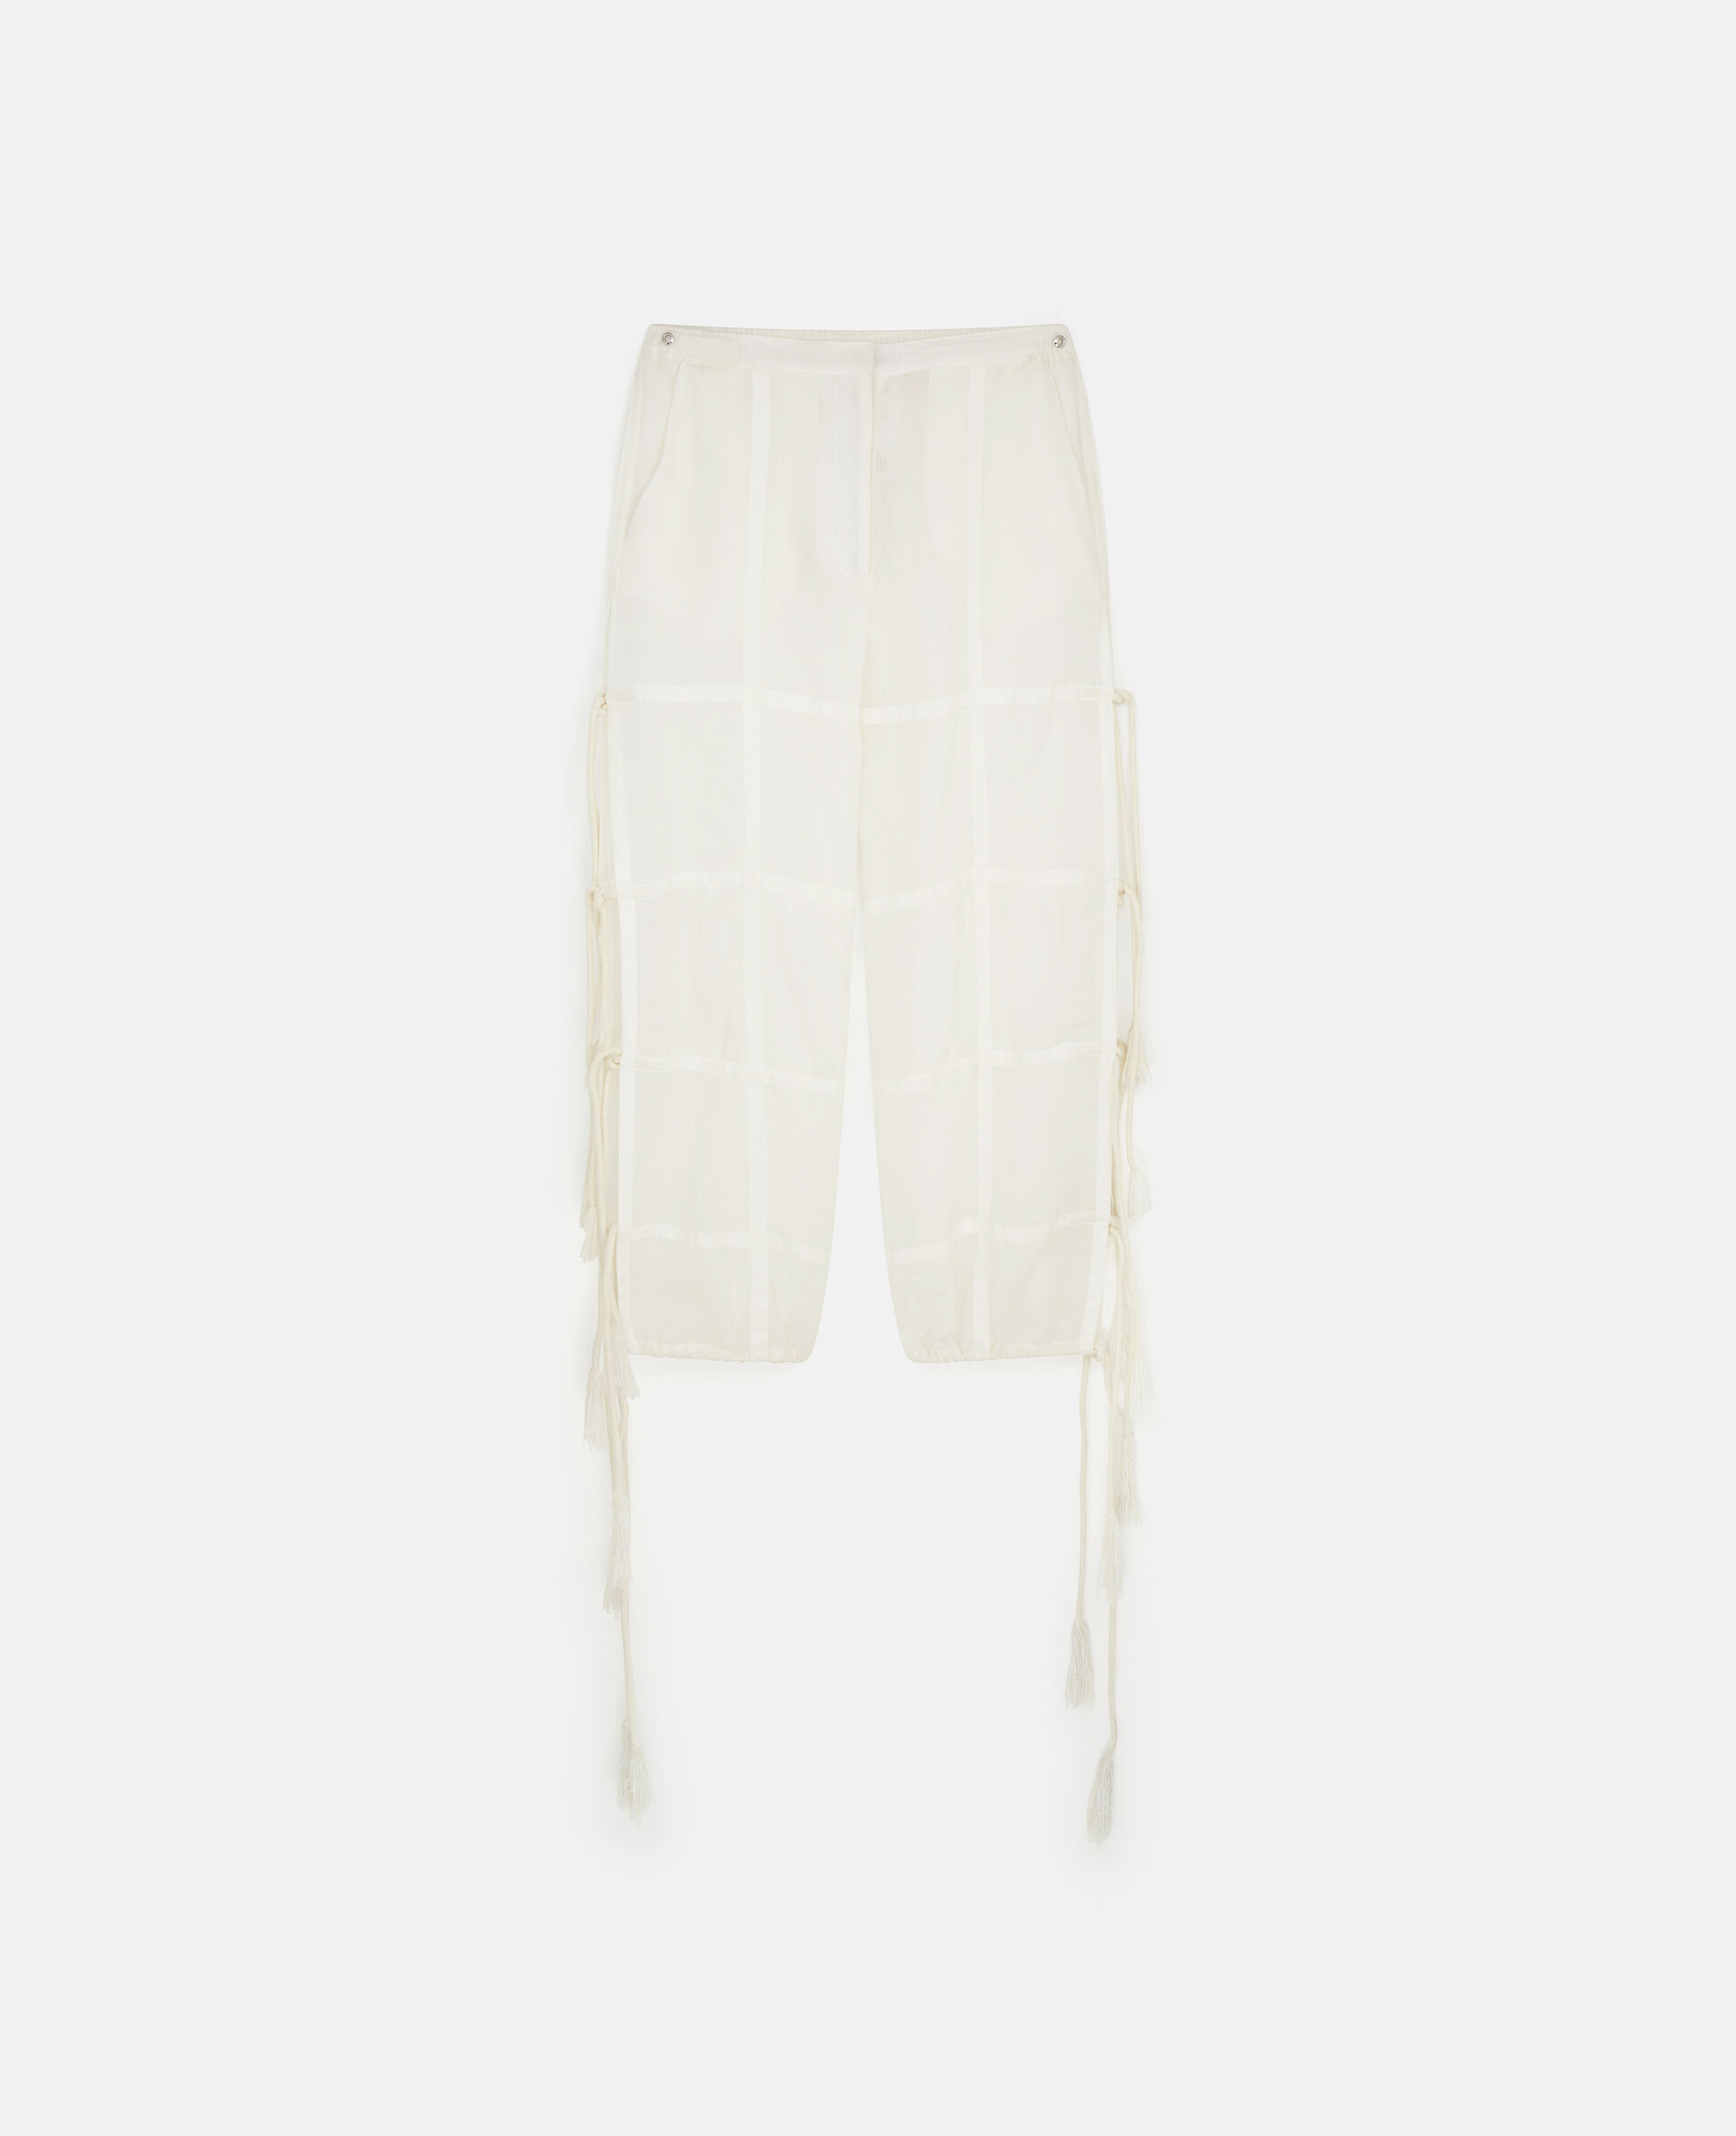 Parachute Cord Pants-White-large image number 0